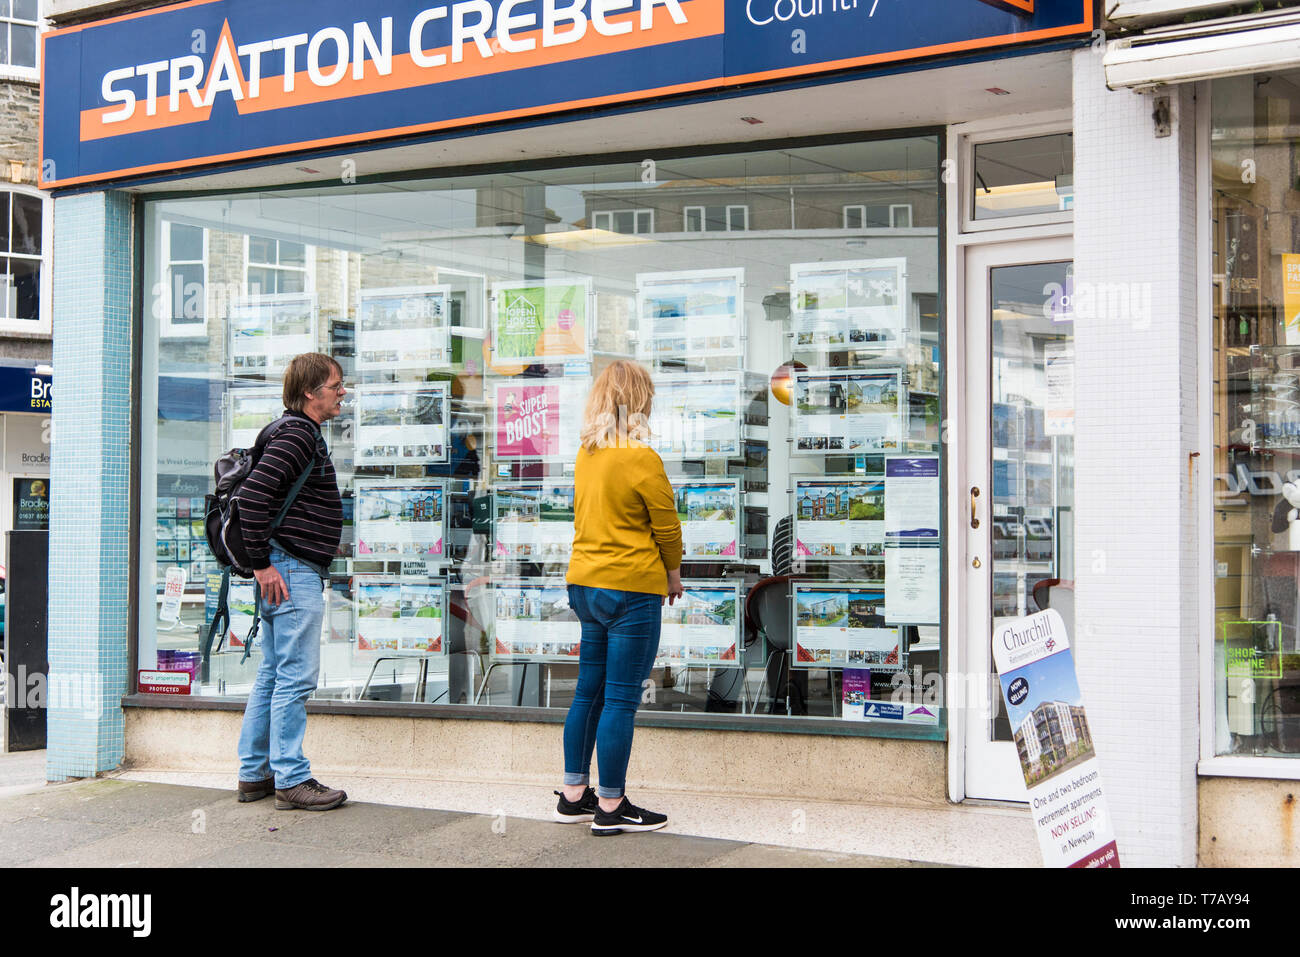 People looking at property information in a Stratton Creber Estate Agent window in Newquay Town Centre in Cornwall. Stock Photo